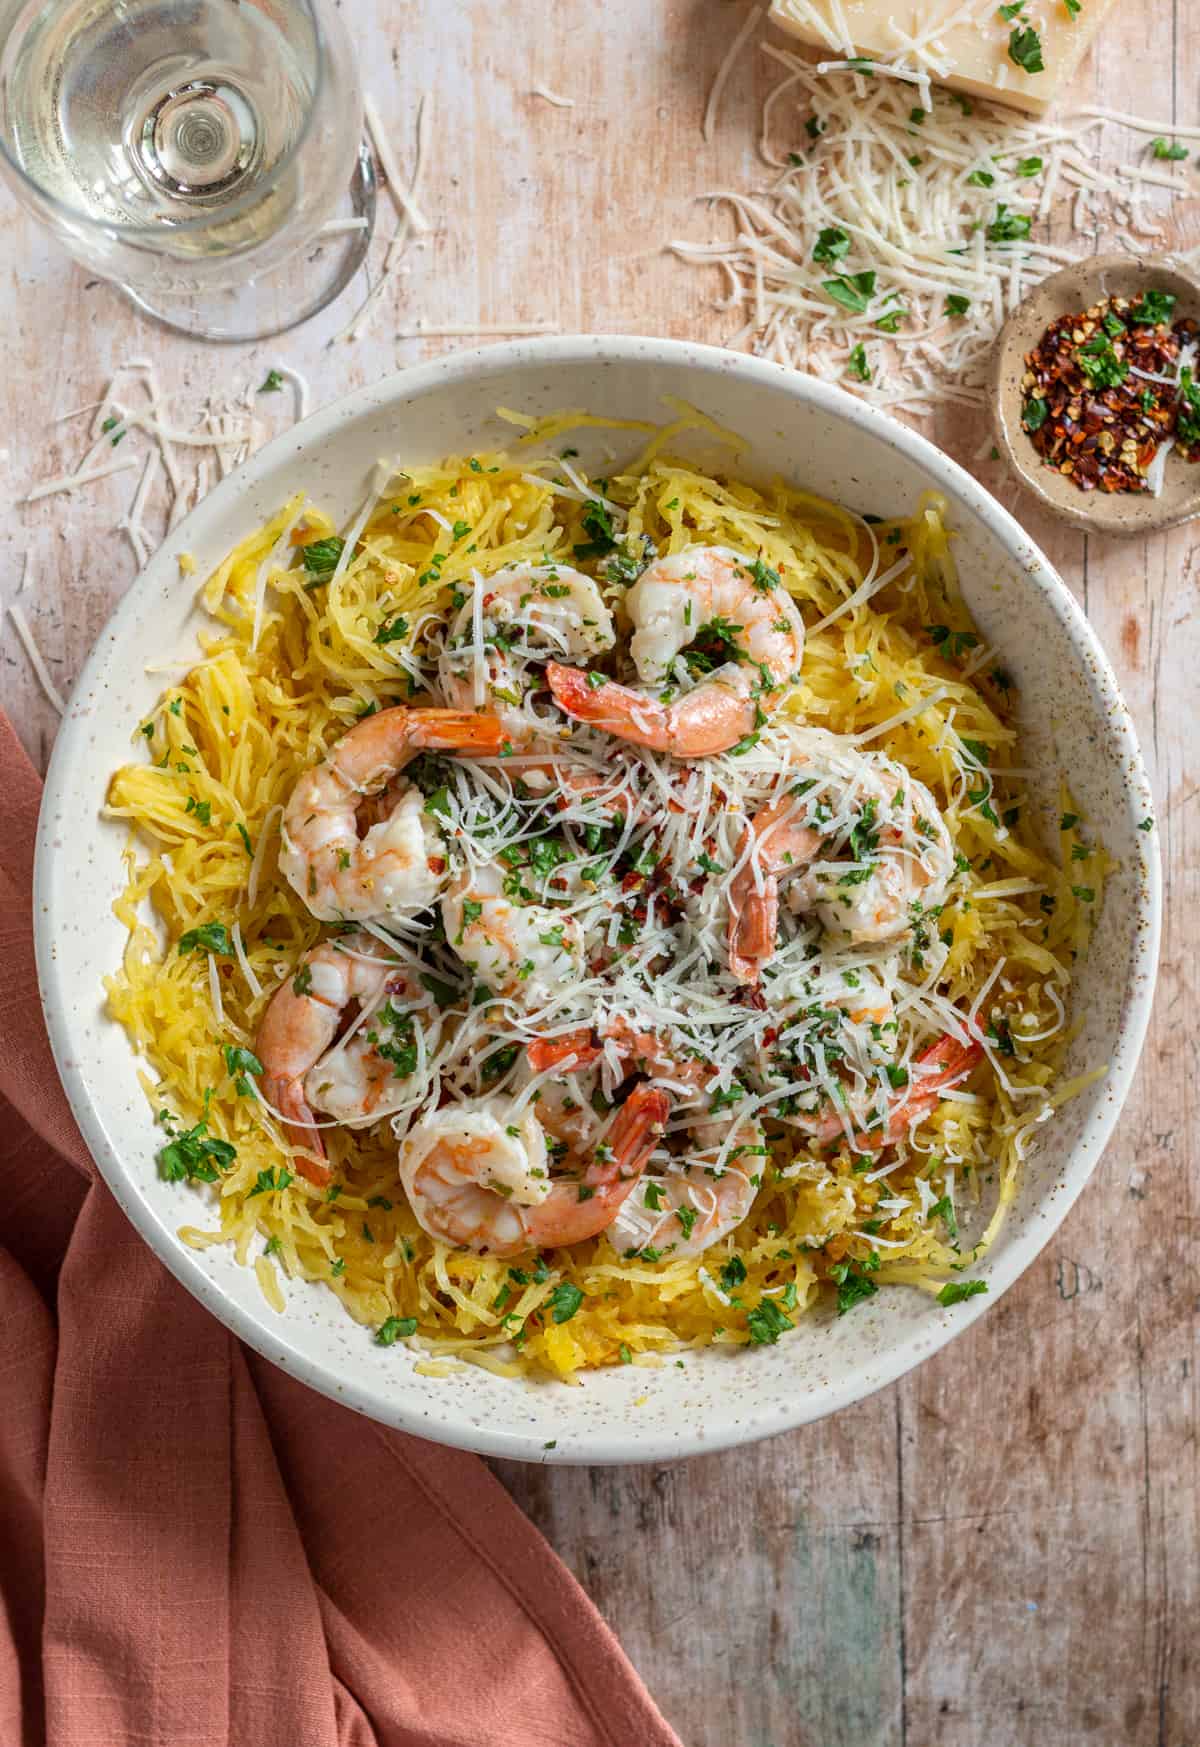 Grilled spaghetti squash shrimp scampi topped with parmesan cheese and red pepper flakes, in a bowl, with a pink napkin and a glass of white wine.